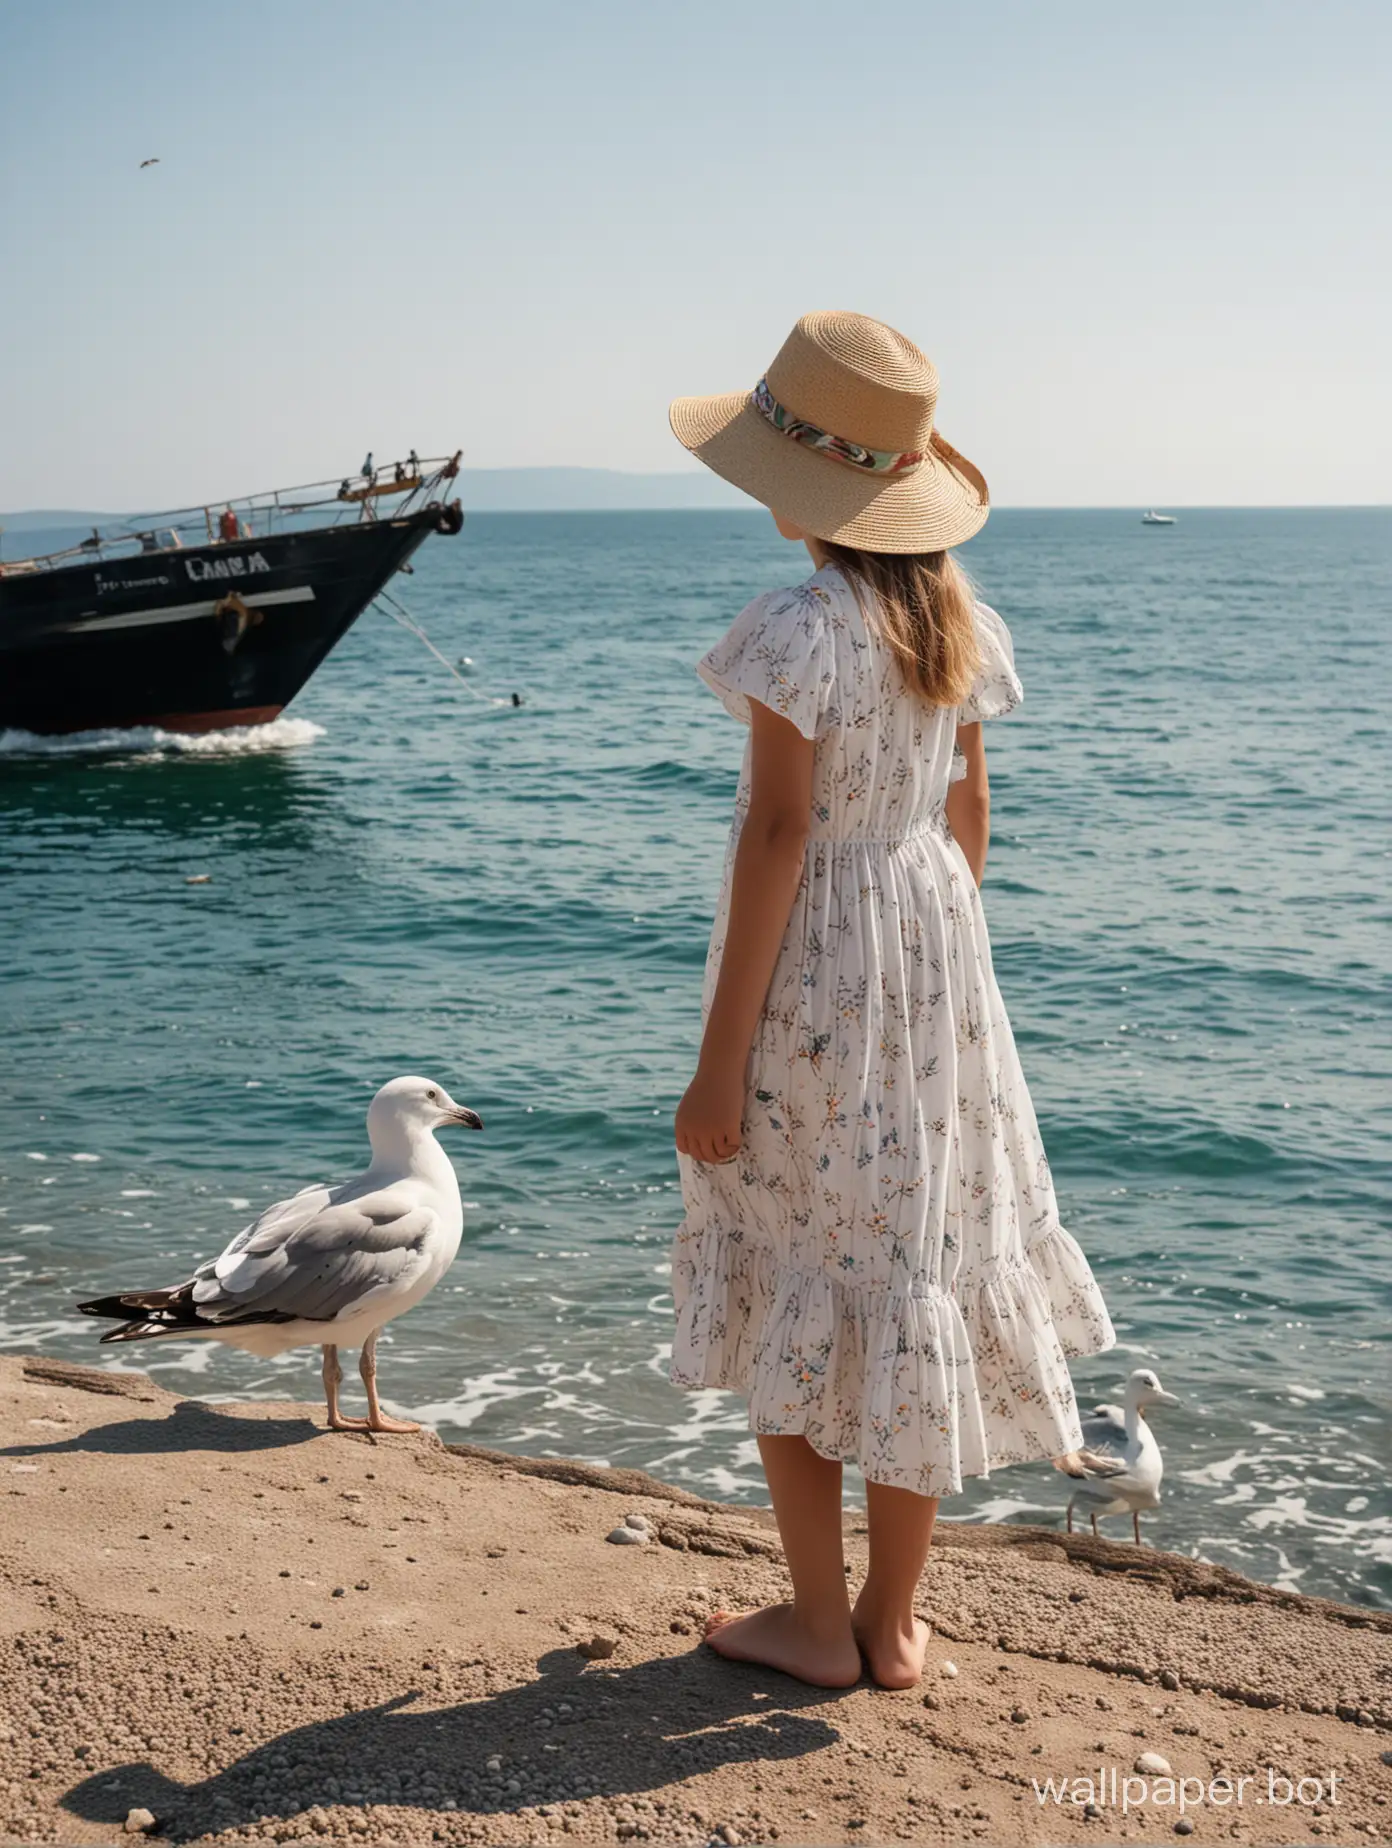 Black Sea, Crimea, 11-year-old girl in a summer dress and hat, view from behind, full-length, distant ship, seagull